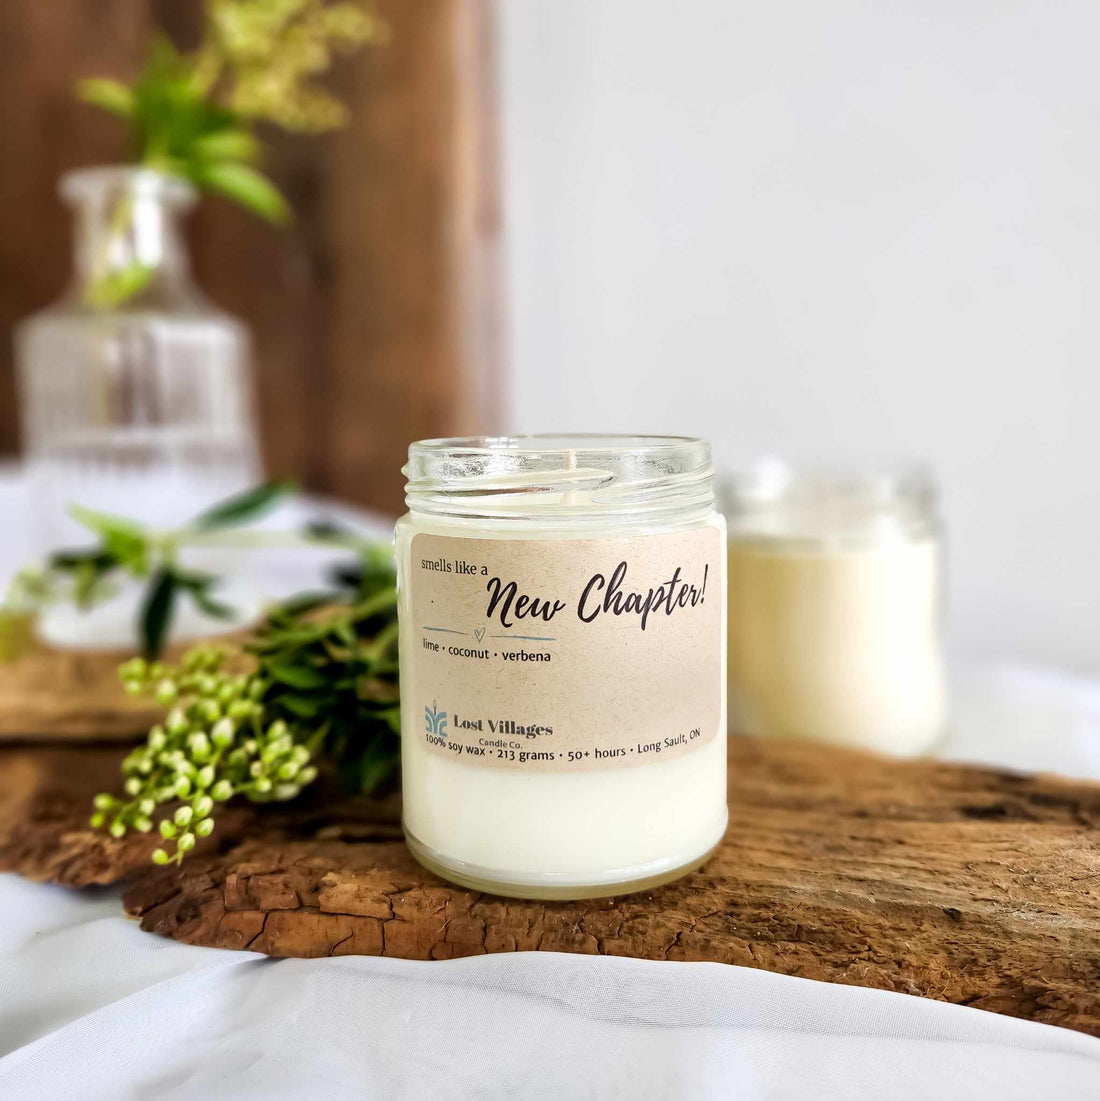 Candle - Smells like a New Chapter ~ Lime Coconut Verbena